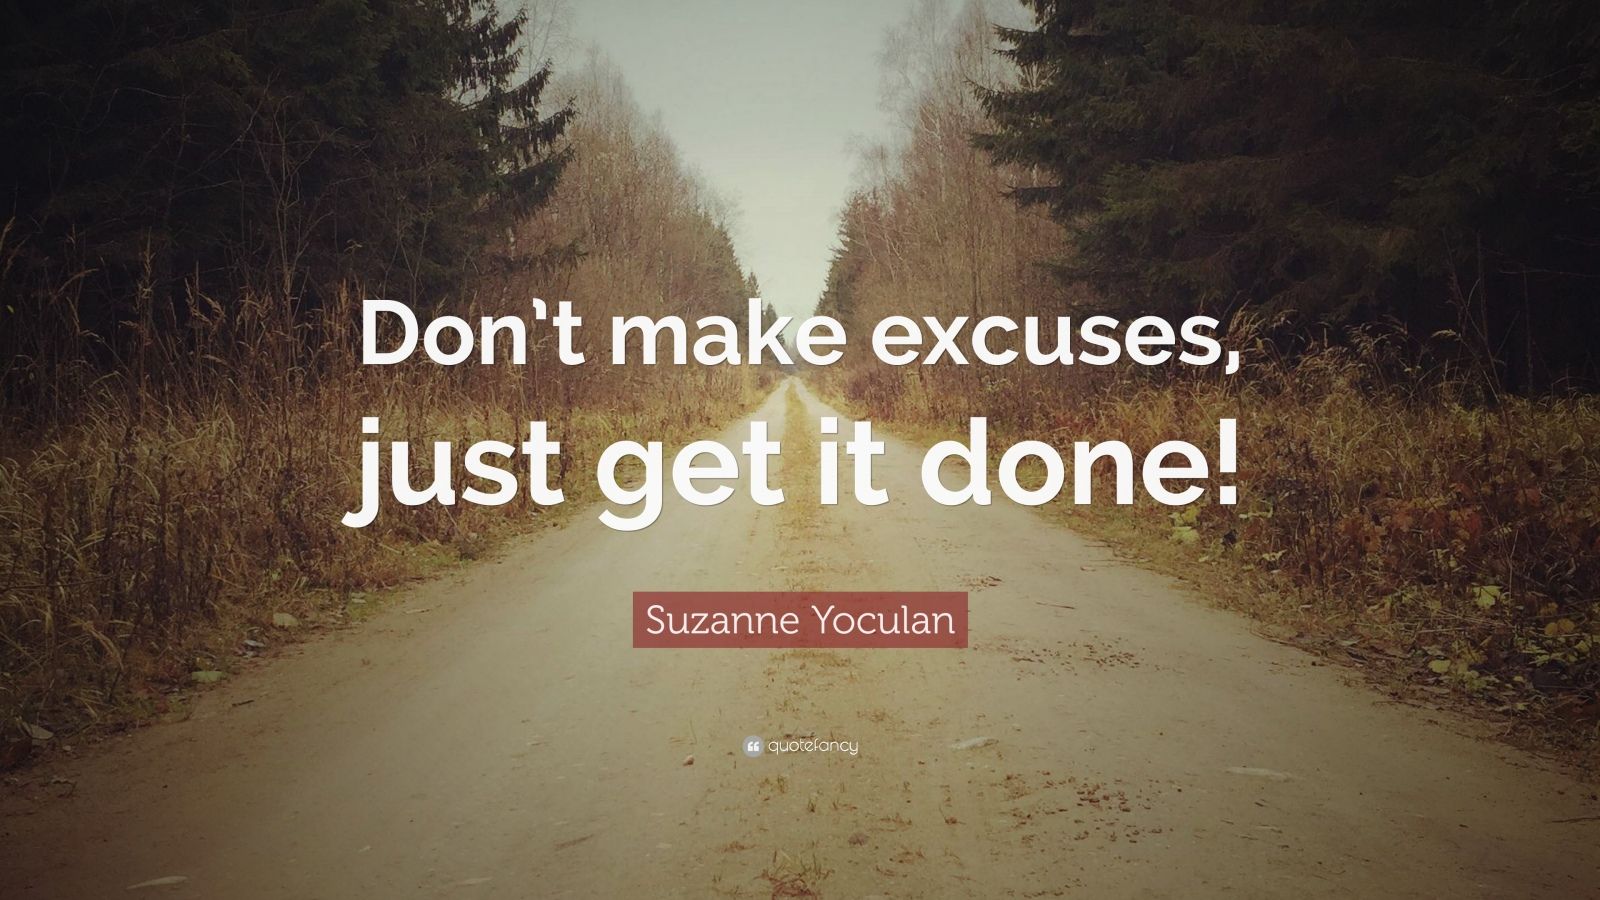 Suzanne Yoculan Quote: “Don’t make excuses, just get it done!”